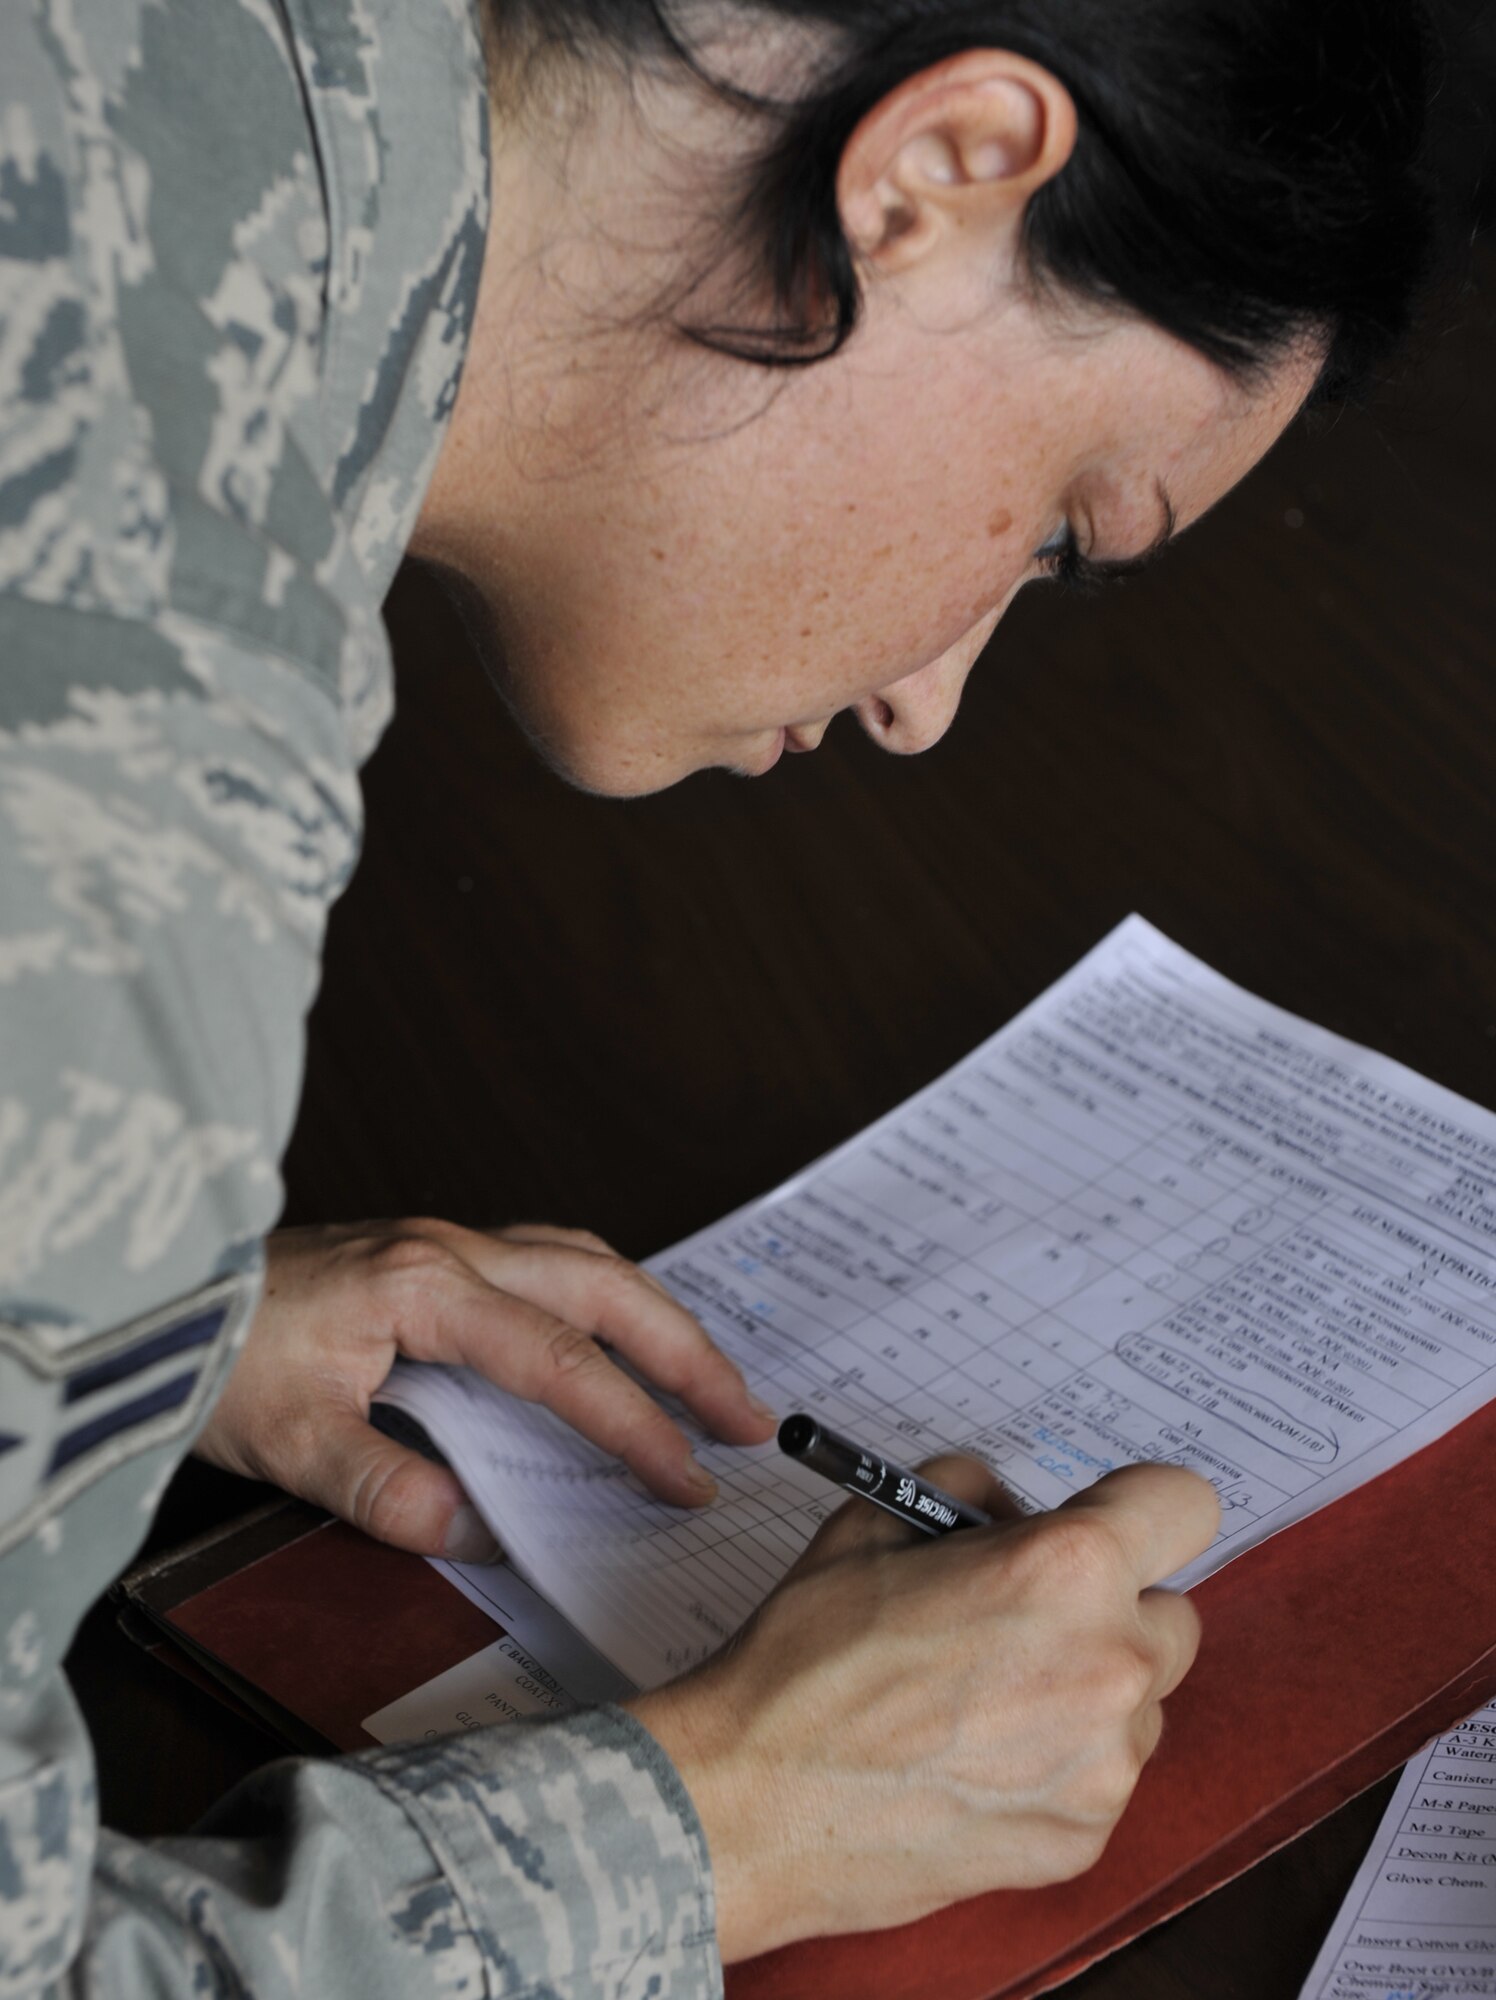 MOODY AIR FORCE BASE, Ga. -- Airman 1st Class Ashley Papatheodore, 23rd Logistics Readiness Squadron individual protective equipment journeymen, signs a hand receipt during the Phase I Operational Readiness Inspection here Sept. 21. Prior to a deployment, members are issued the necessary equipment needed while downrange. (U.S. Air Force photo by Senior Airman Schelli Jones)